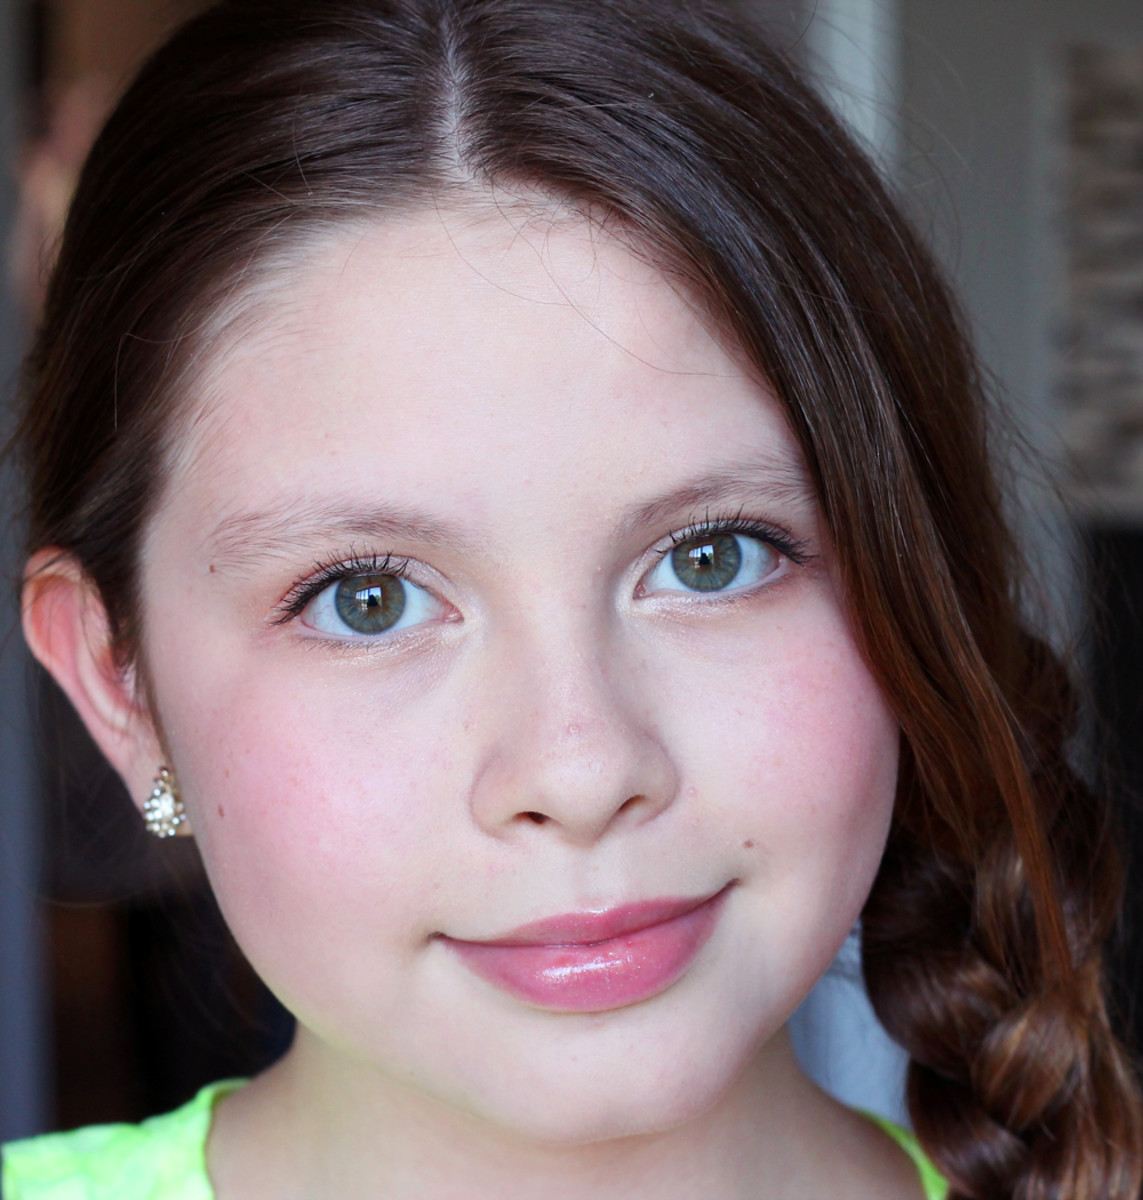 Age-appropriate tween makeup: there's my sweet girl.